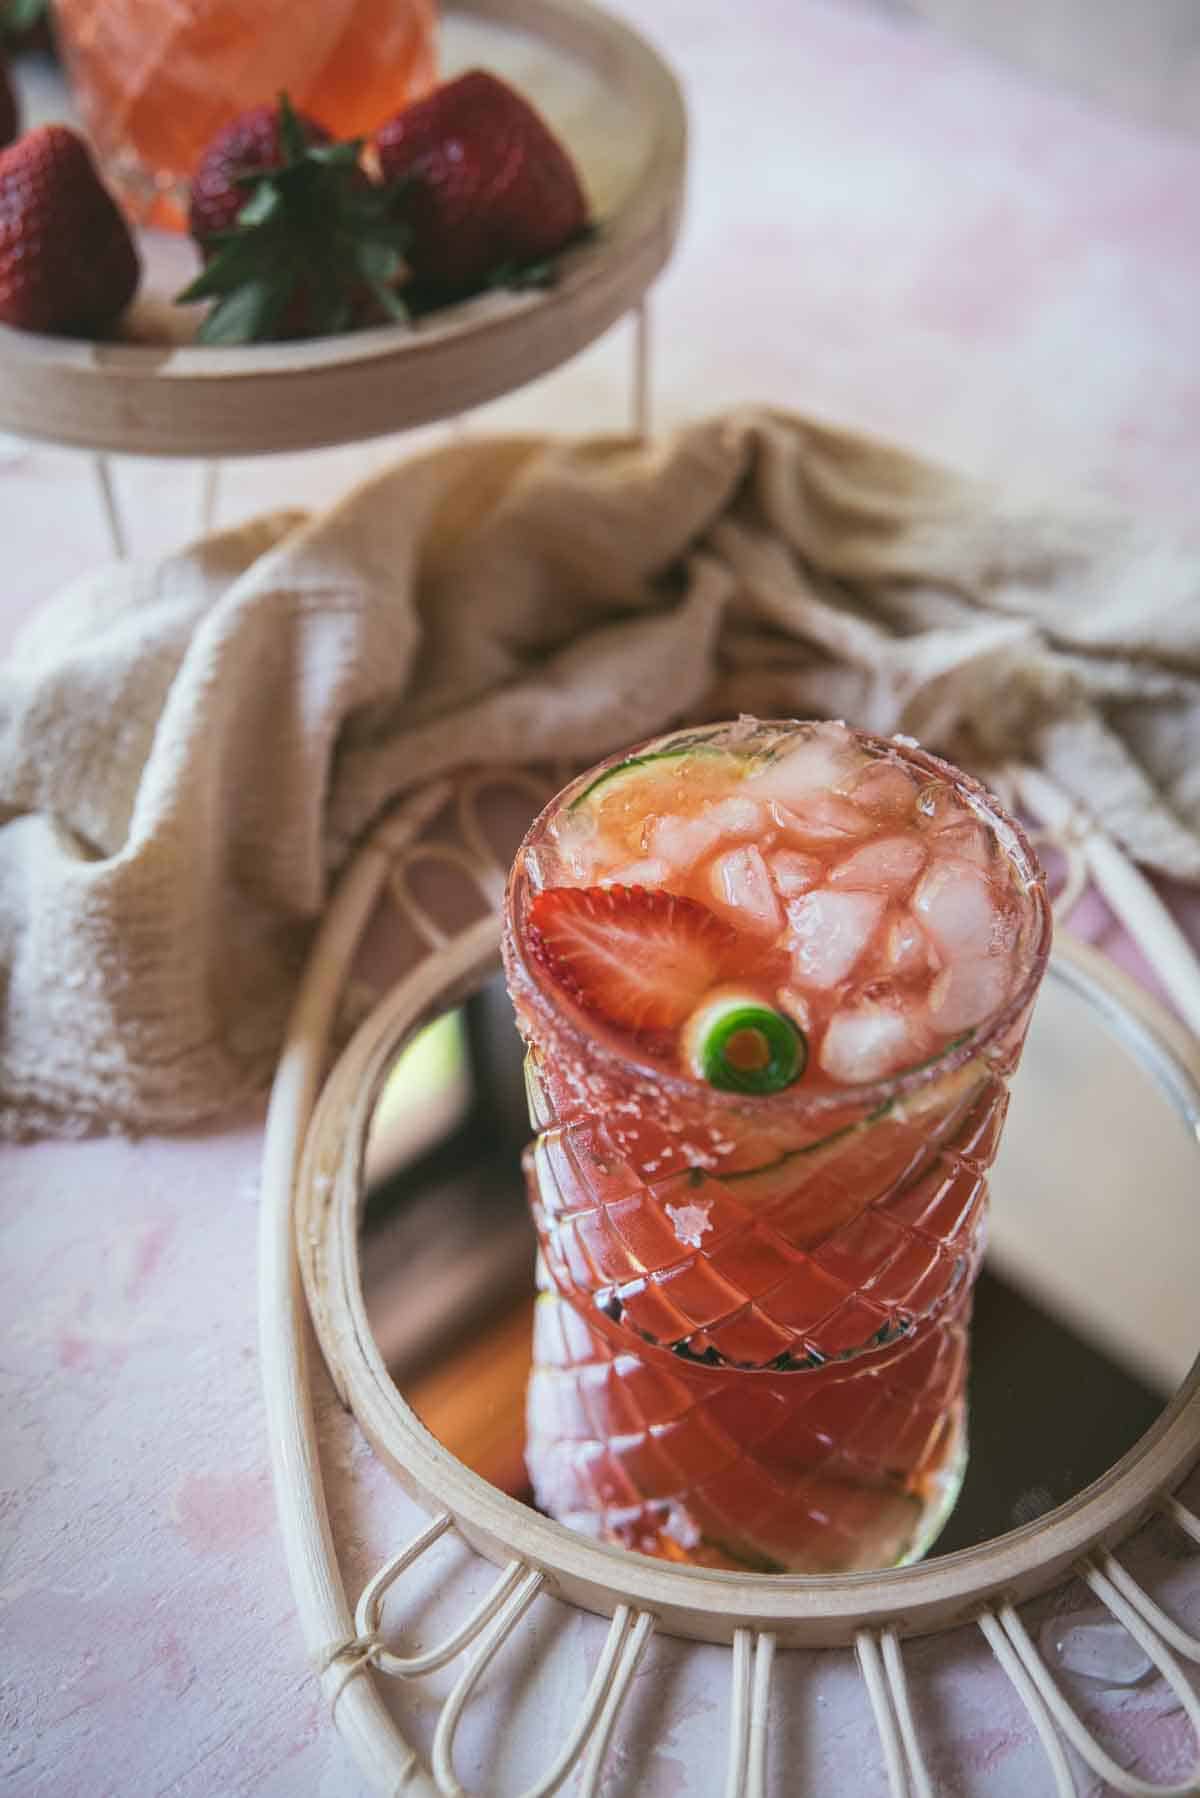 Completed pink cocktail, in decorative rocks glass. Topped with lots of ice, cucumber scroll and a strawberry slice. The drink sits on top of a boho style wicker mirror. A cloth is nearby and a short table with additional strawberries and another cocktail.